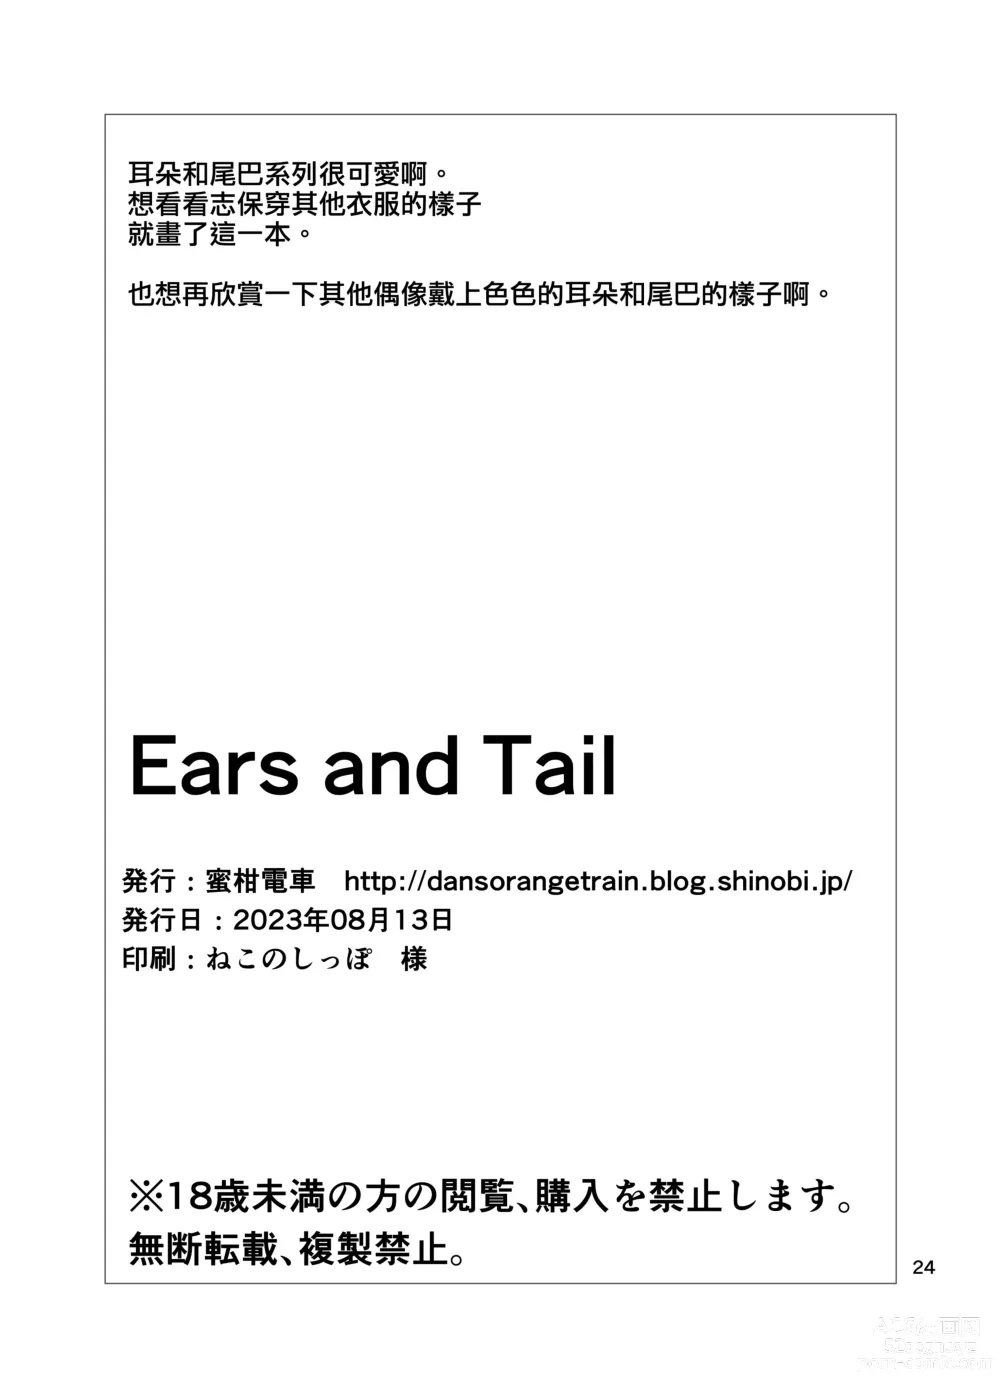 Page 26 of doujinshi Ears and Tail